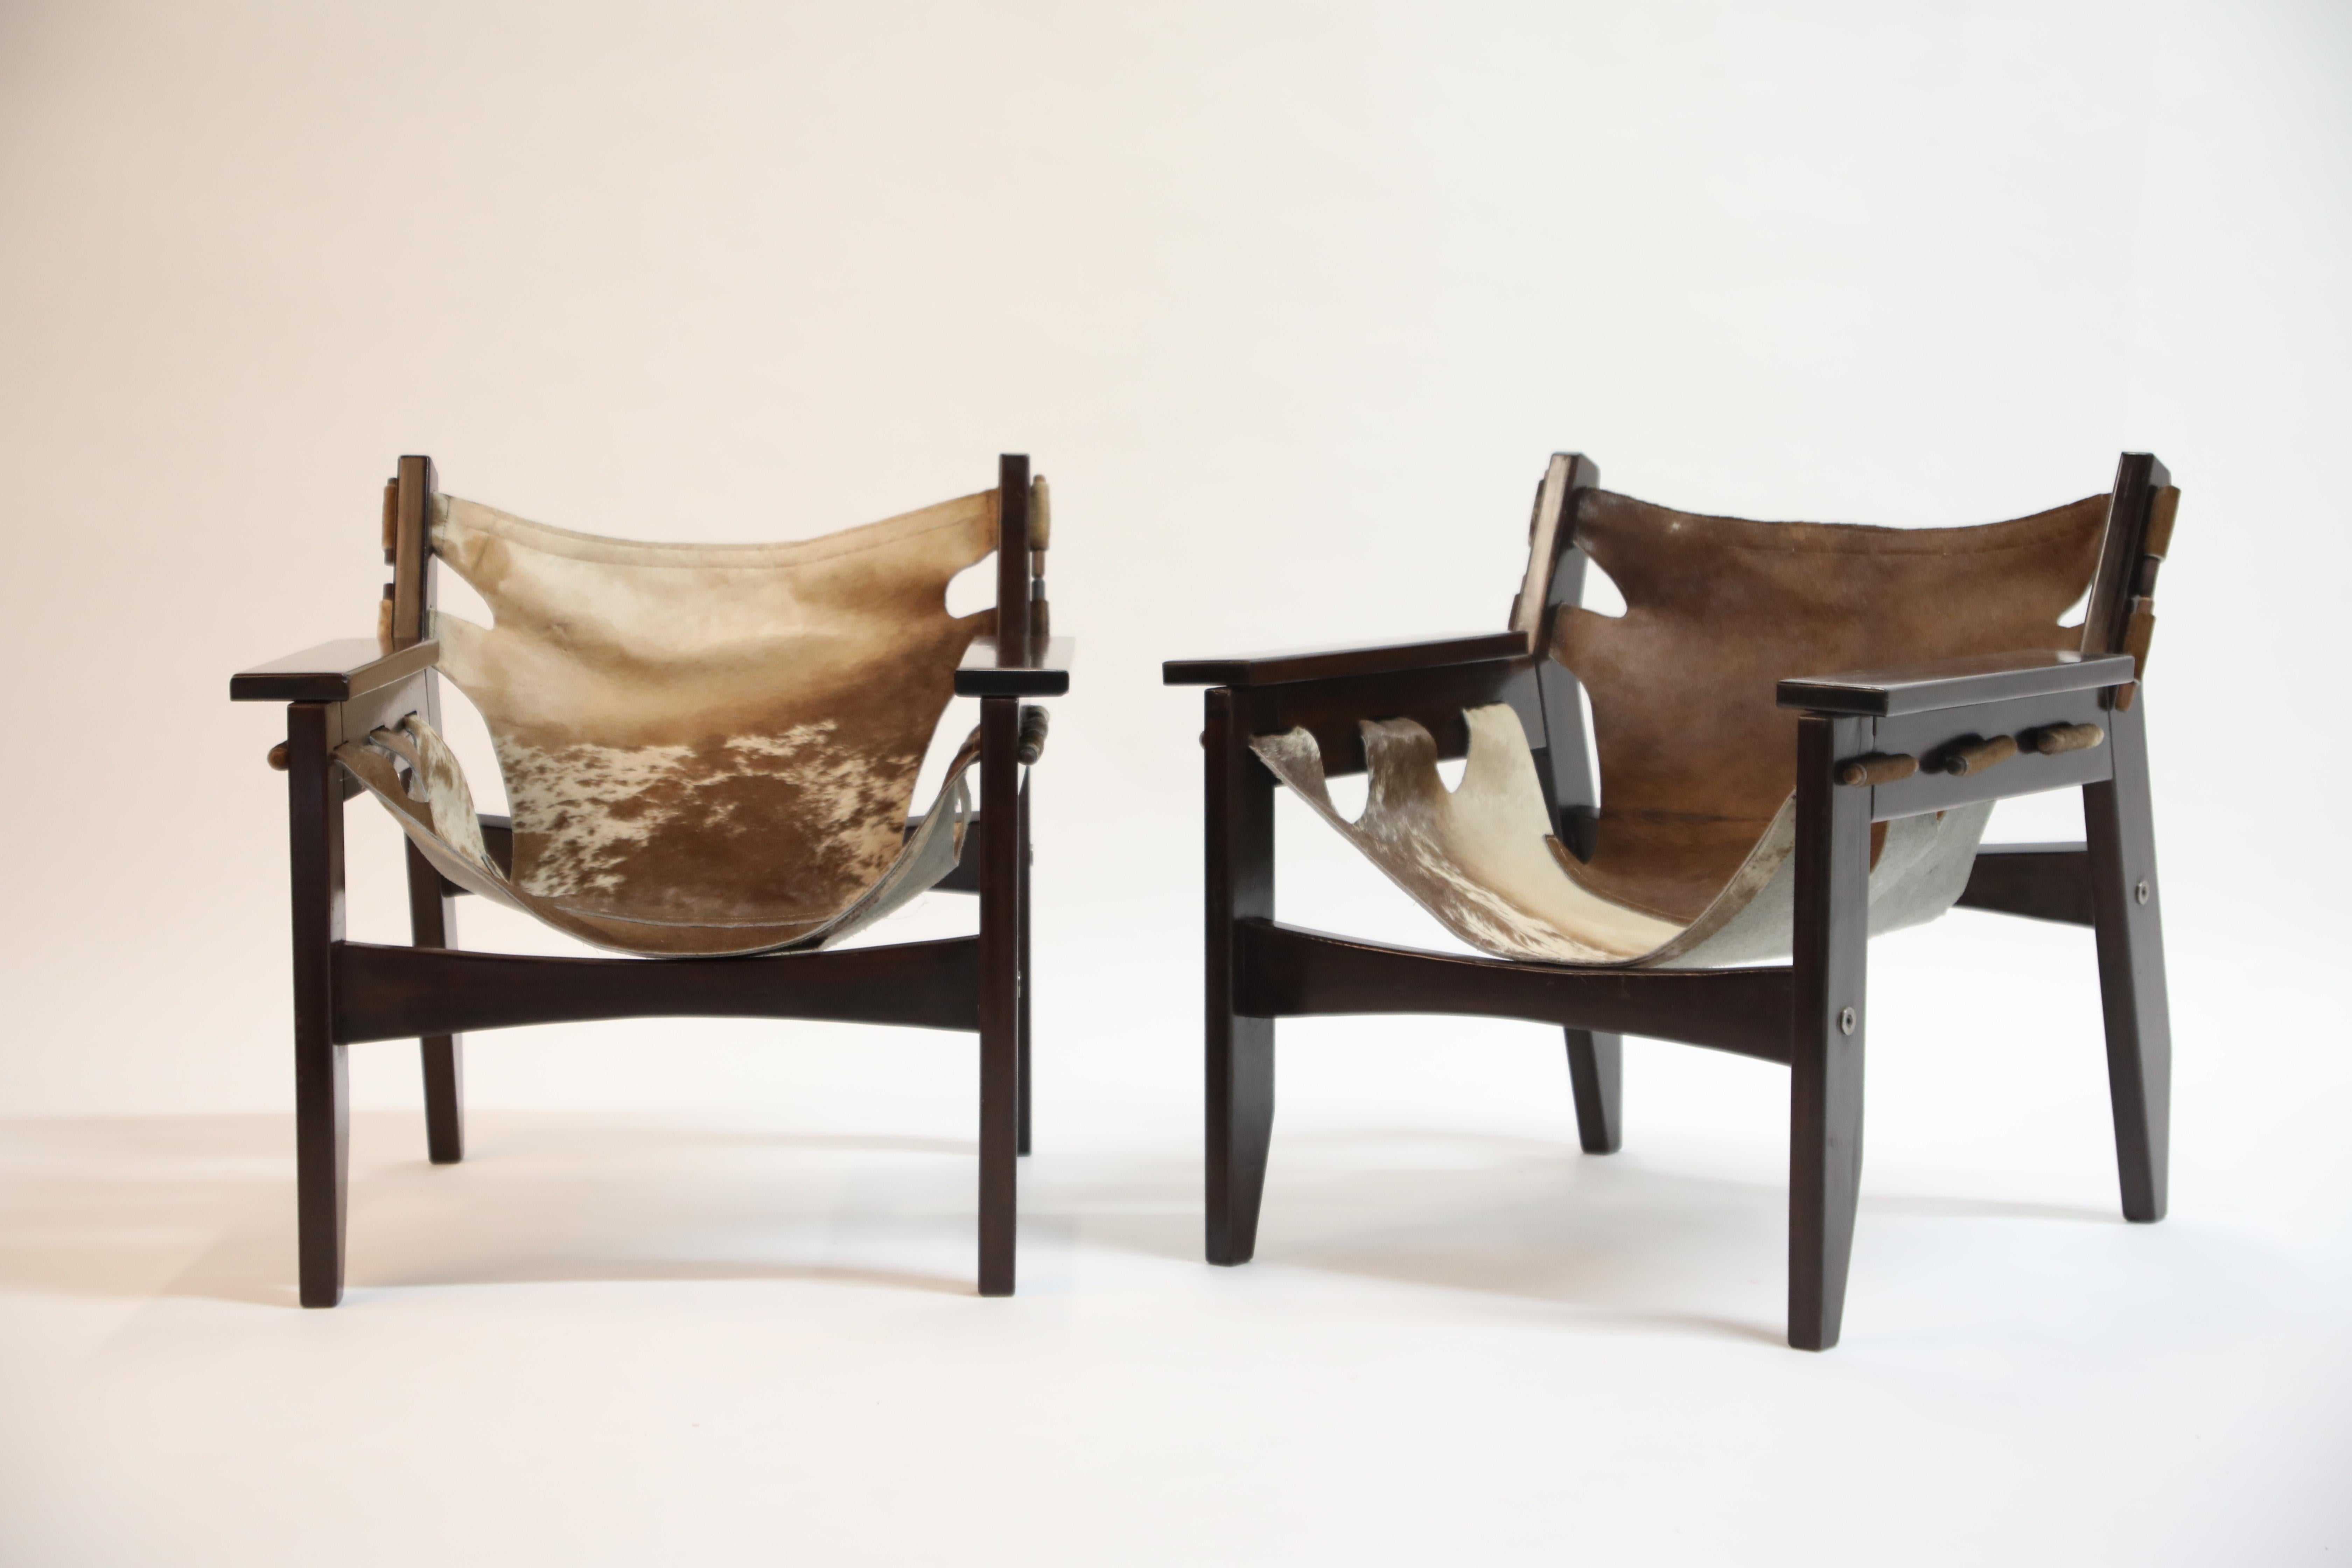 A charming pair and wonderful examples of Kilin chairs by famed Brazilian modern designer Sergio Rodrigues for OCA in 1970s Brazil. Frame is a succulent rosewood and the leather slings are hair-on cowhide. The pattern on each sling is slightly